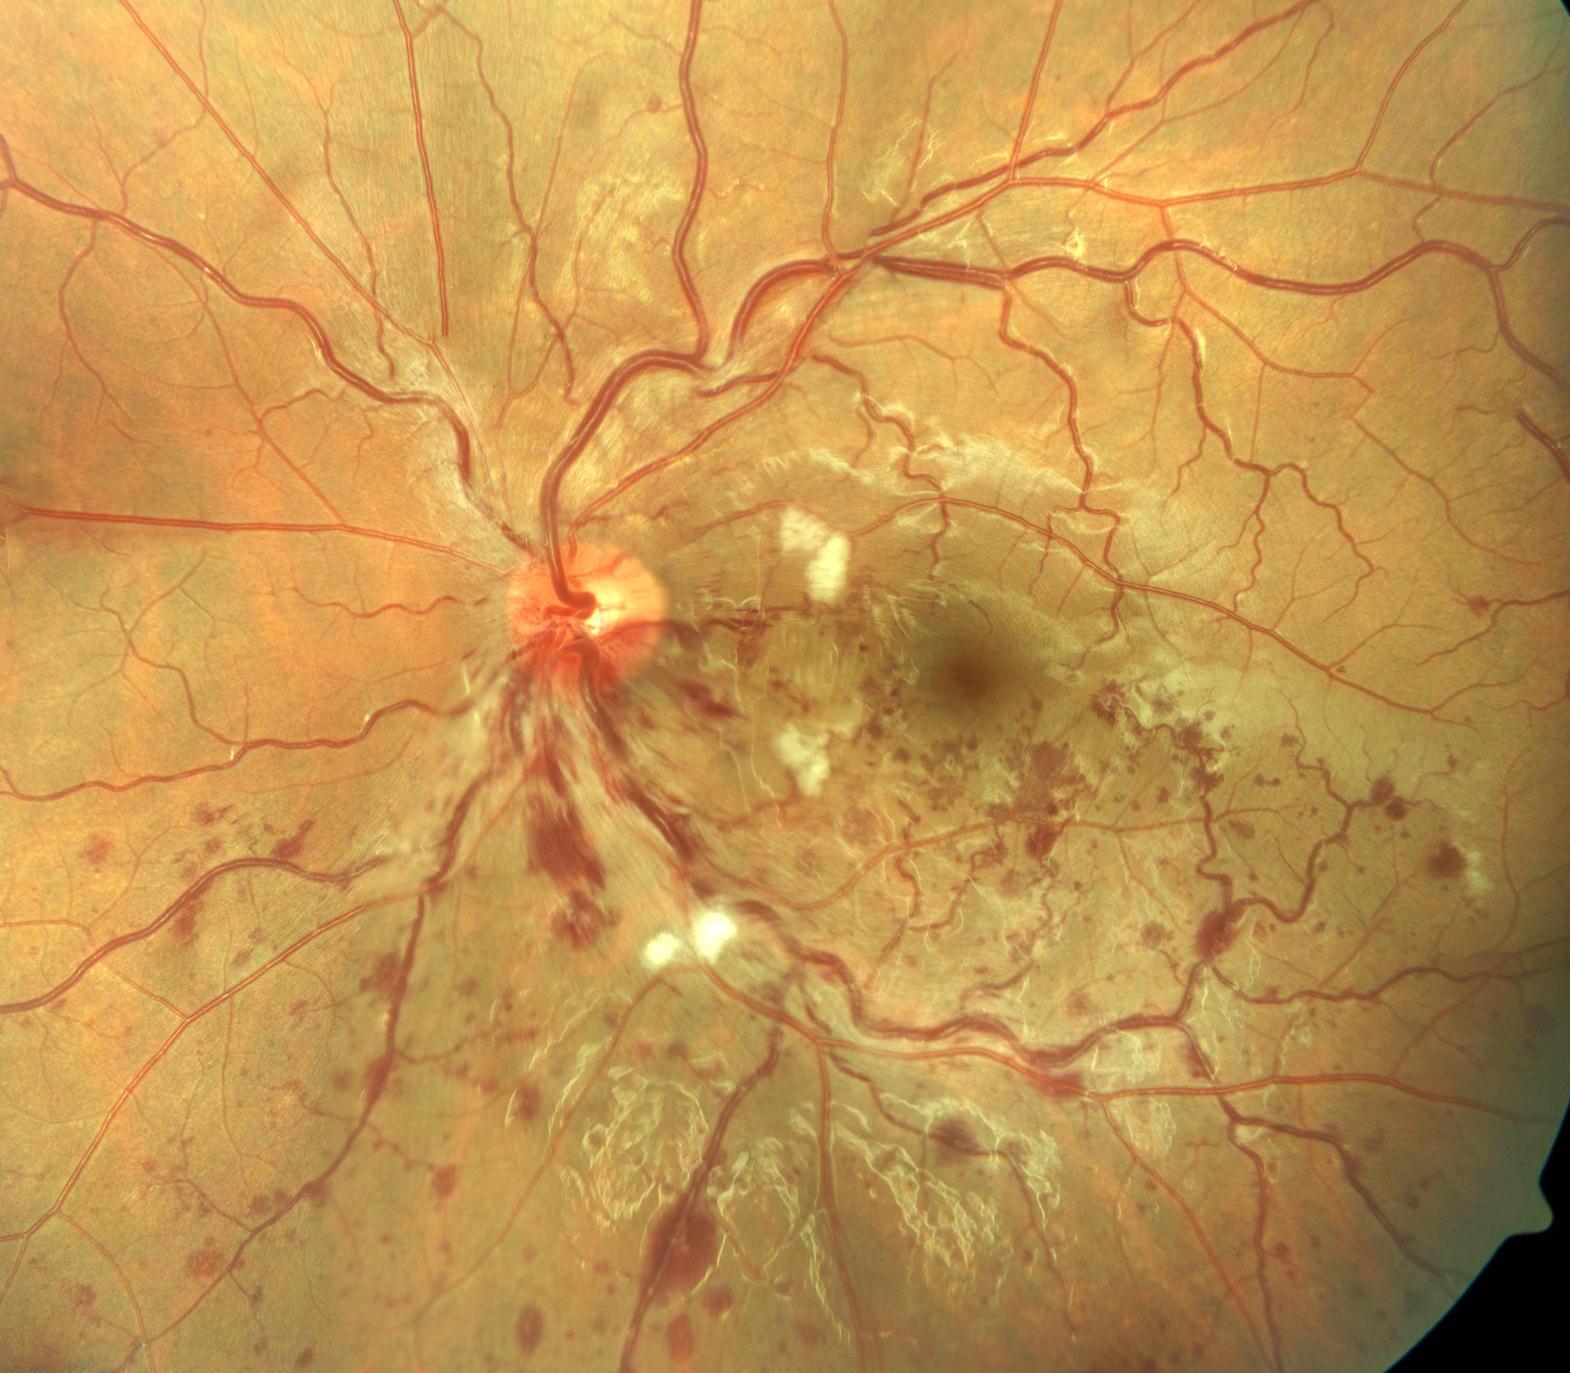  The figure shows evidence of BRVO in the left eye. There is dilatation and tortuosity of the affected venous segment, with flame-shaped and dot/blot haemorrhages, retinal edema and cotton wool spots in the section of the retina drained by the obstructed vein.